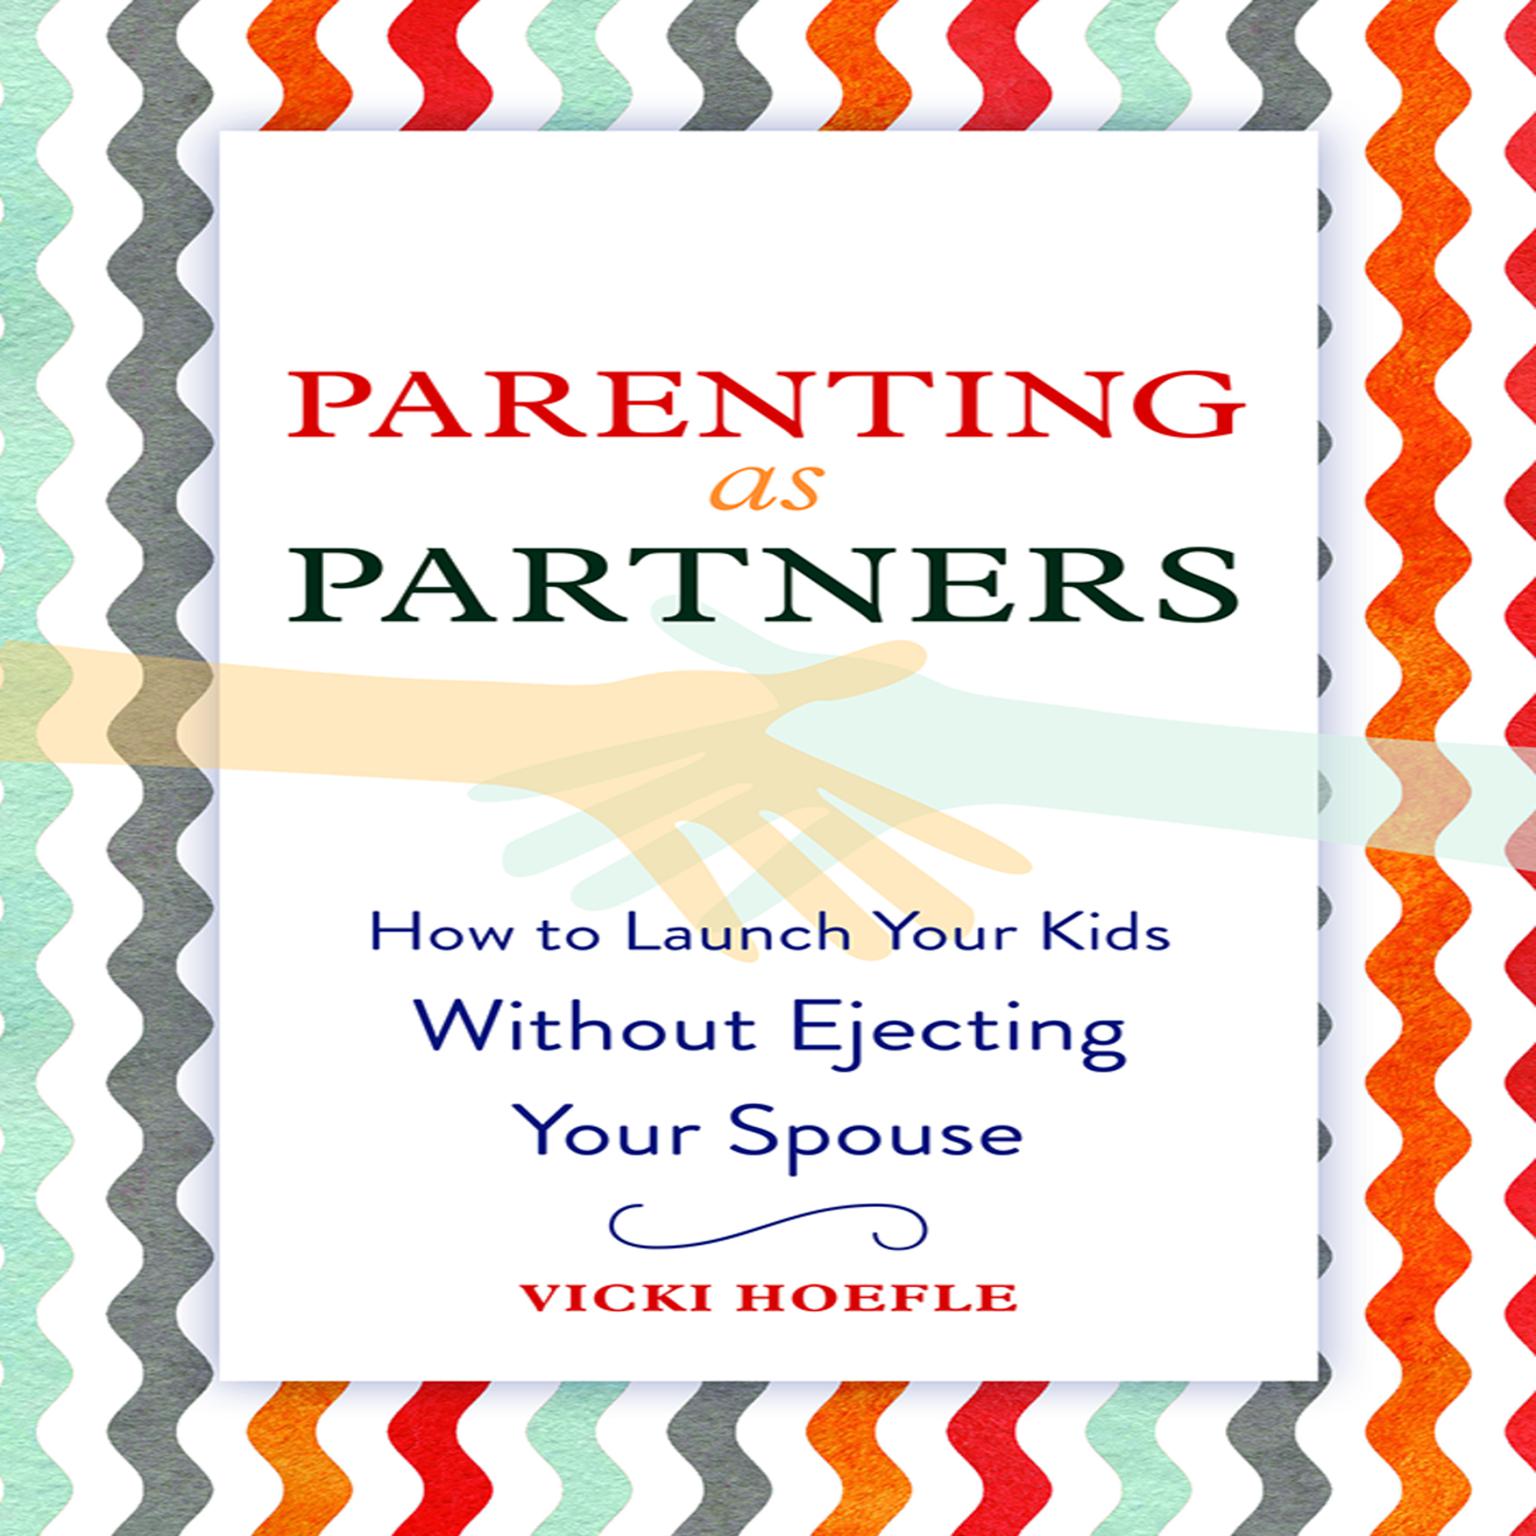 Parenting as Partners: How to Launch Your Kids Without Ejecting Your Spouse Audiobook, by Vicki Hoefle